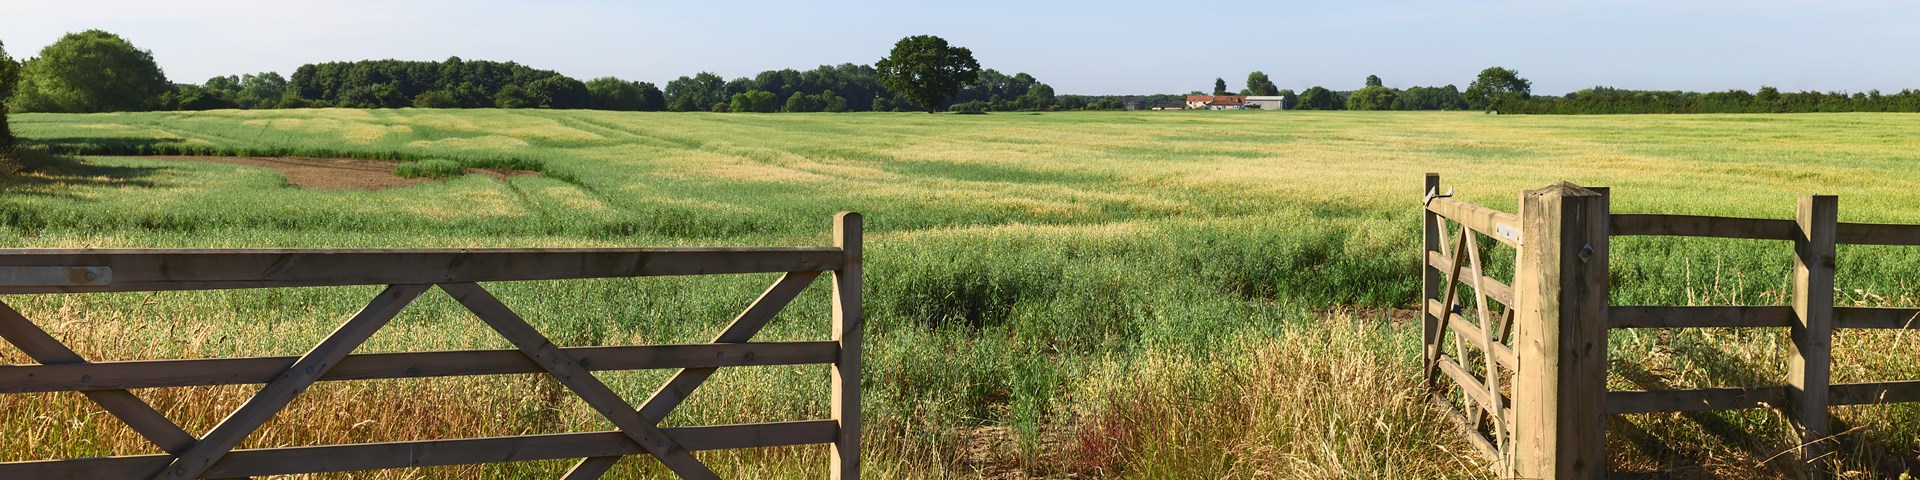 One side of the gate open for someone to access a field on a sunny evening 